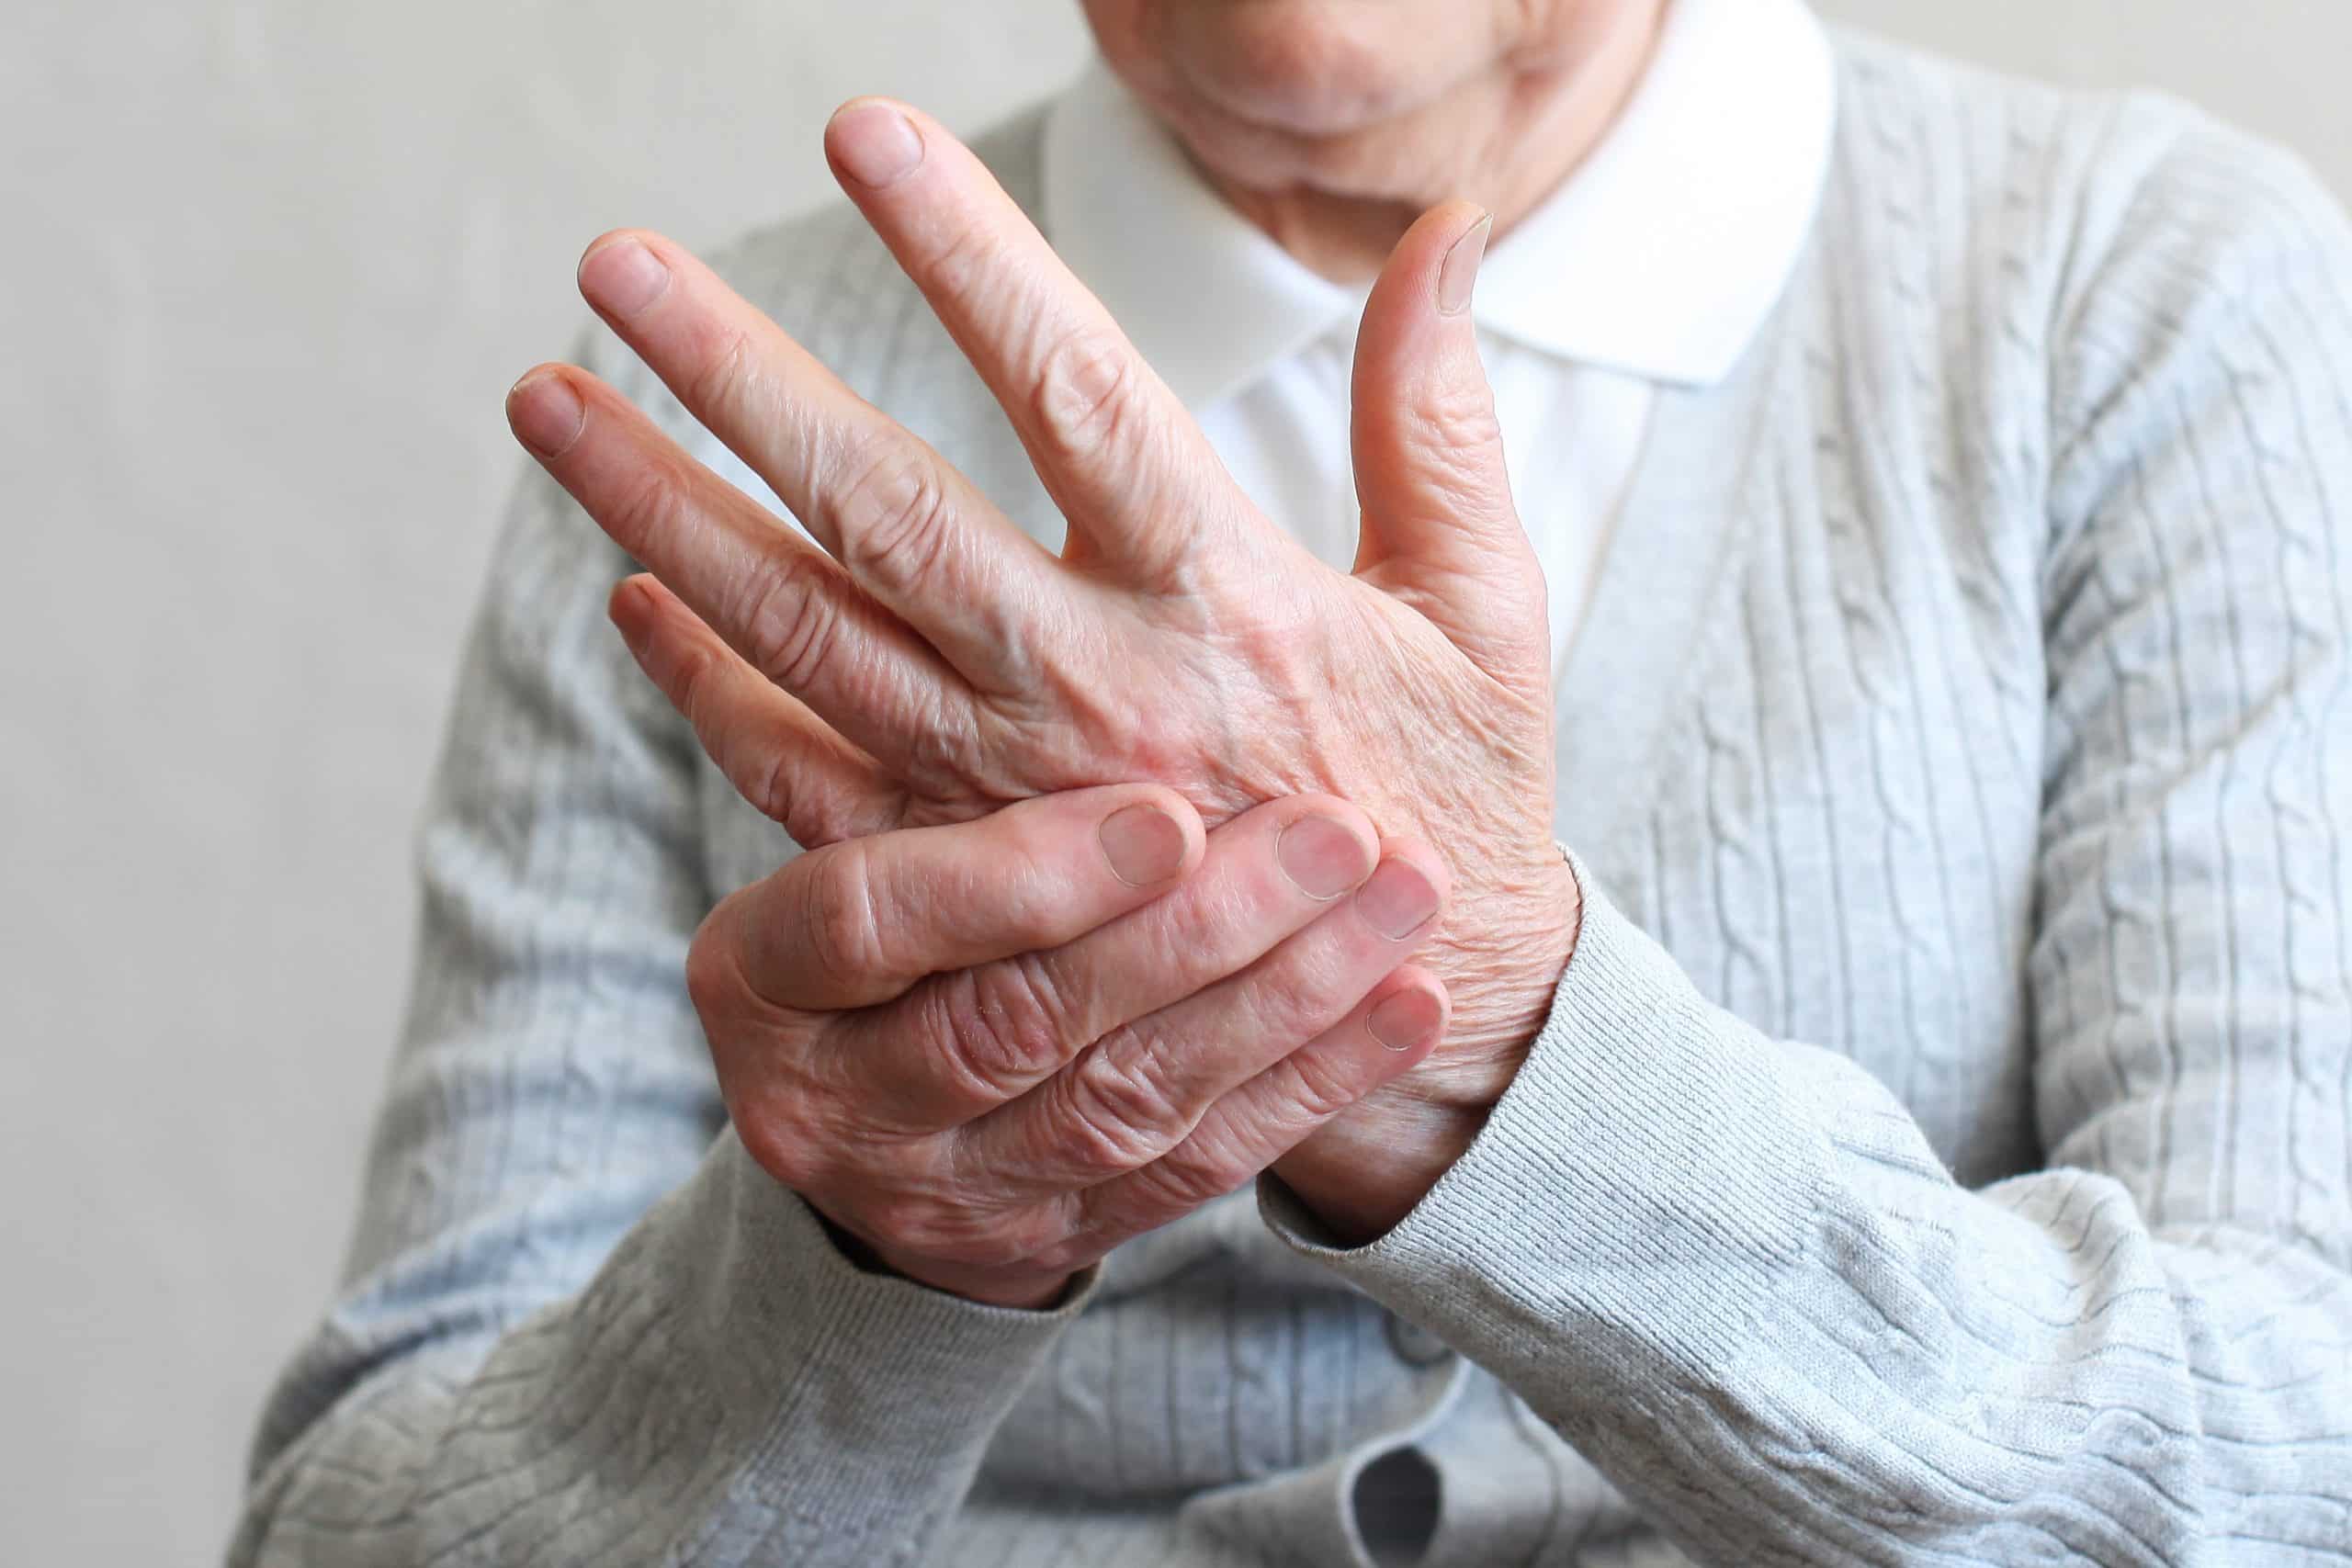 Parkinson’s Tremor Symptoms: Finger Twitching as an Early Sign